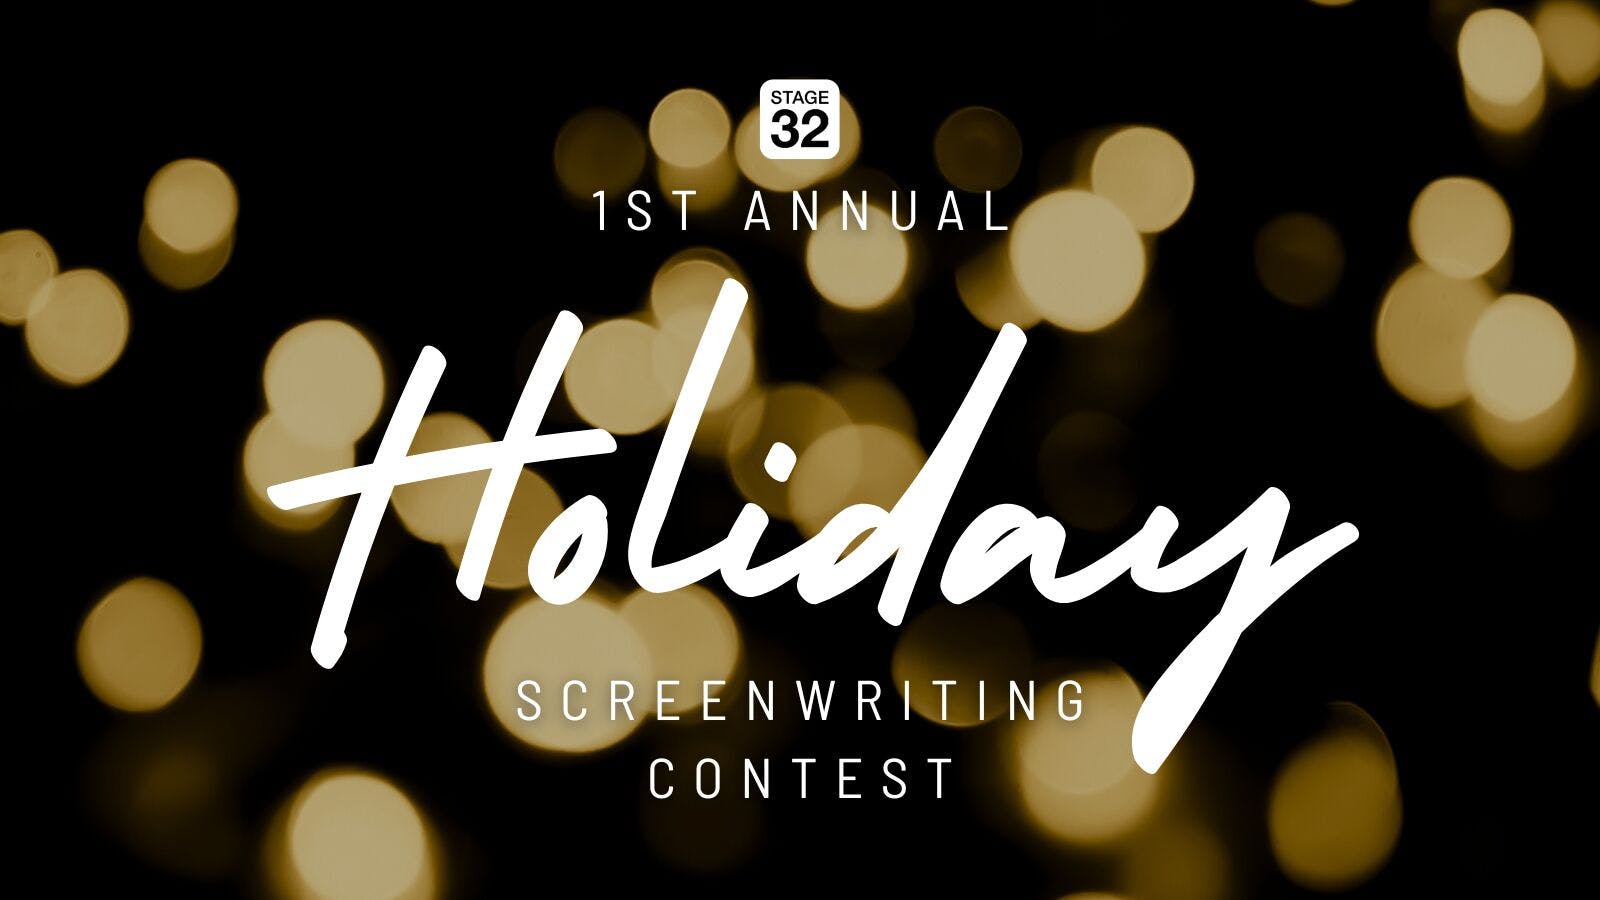 Announcing the 1st Annual Holiday Screenwriting Contest